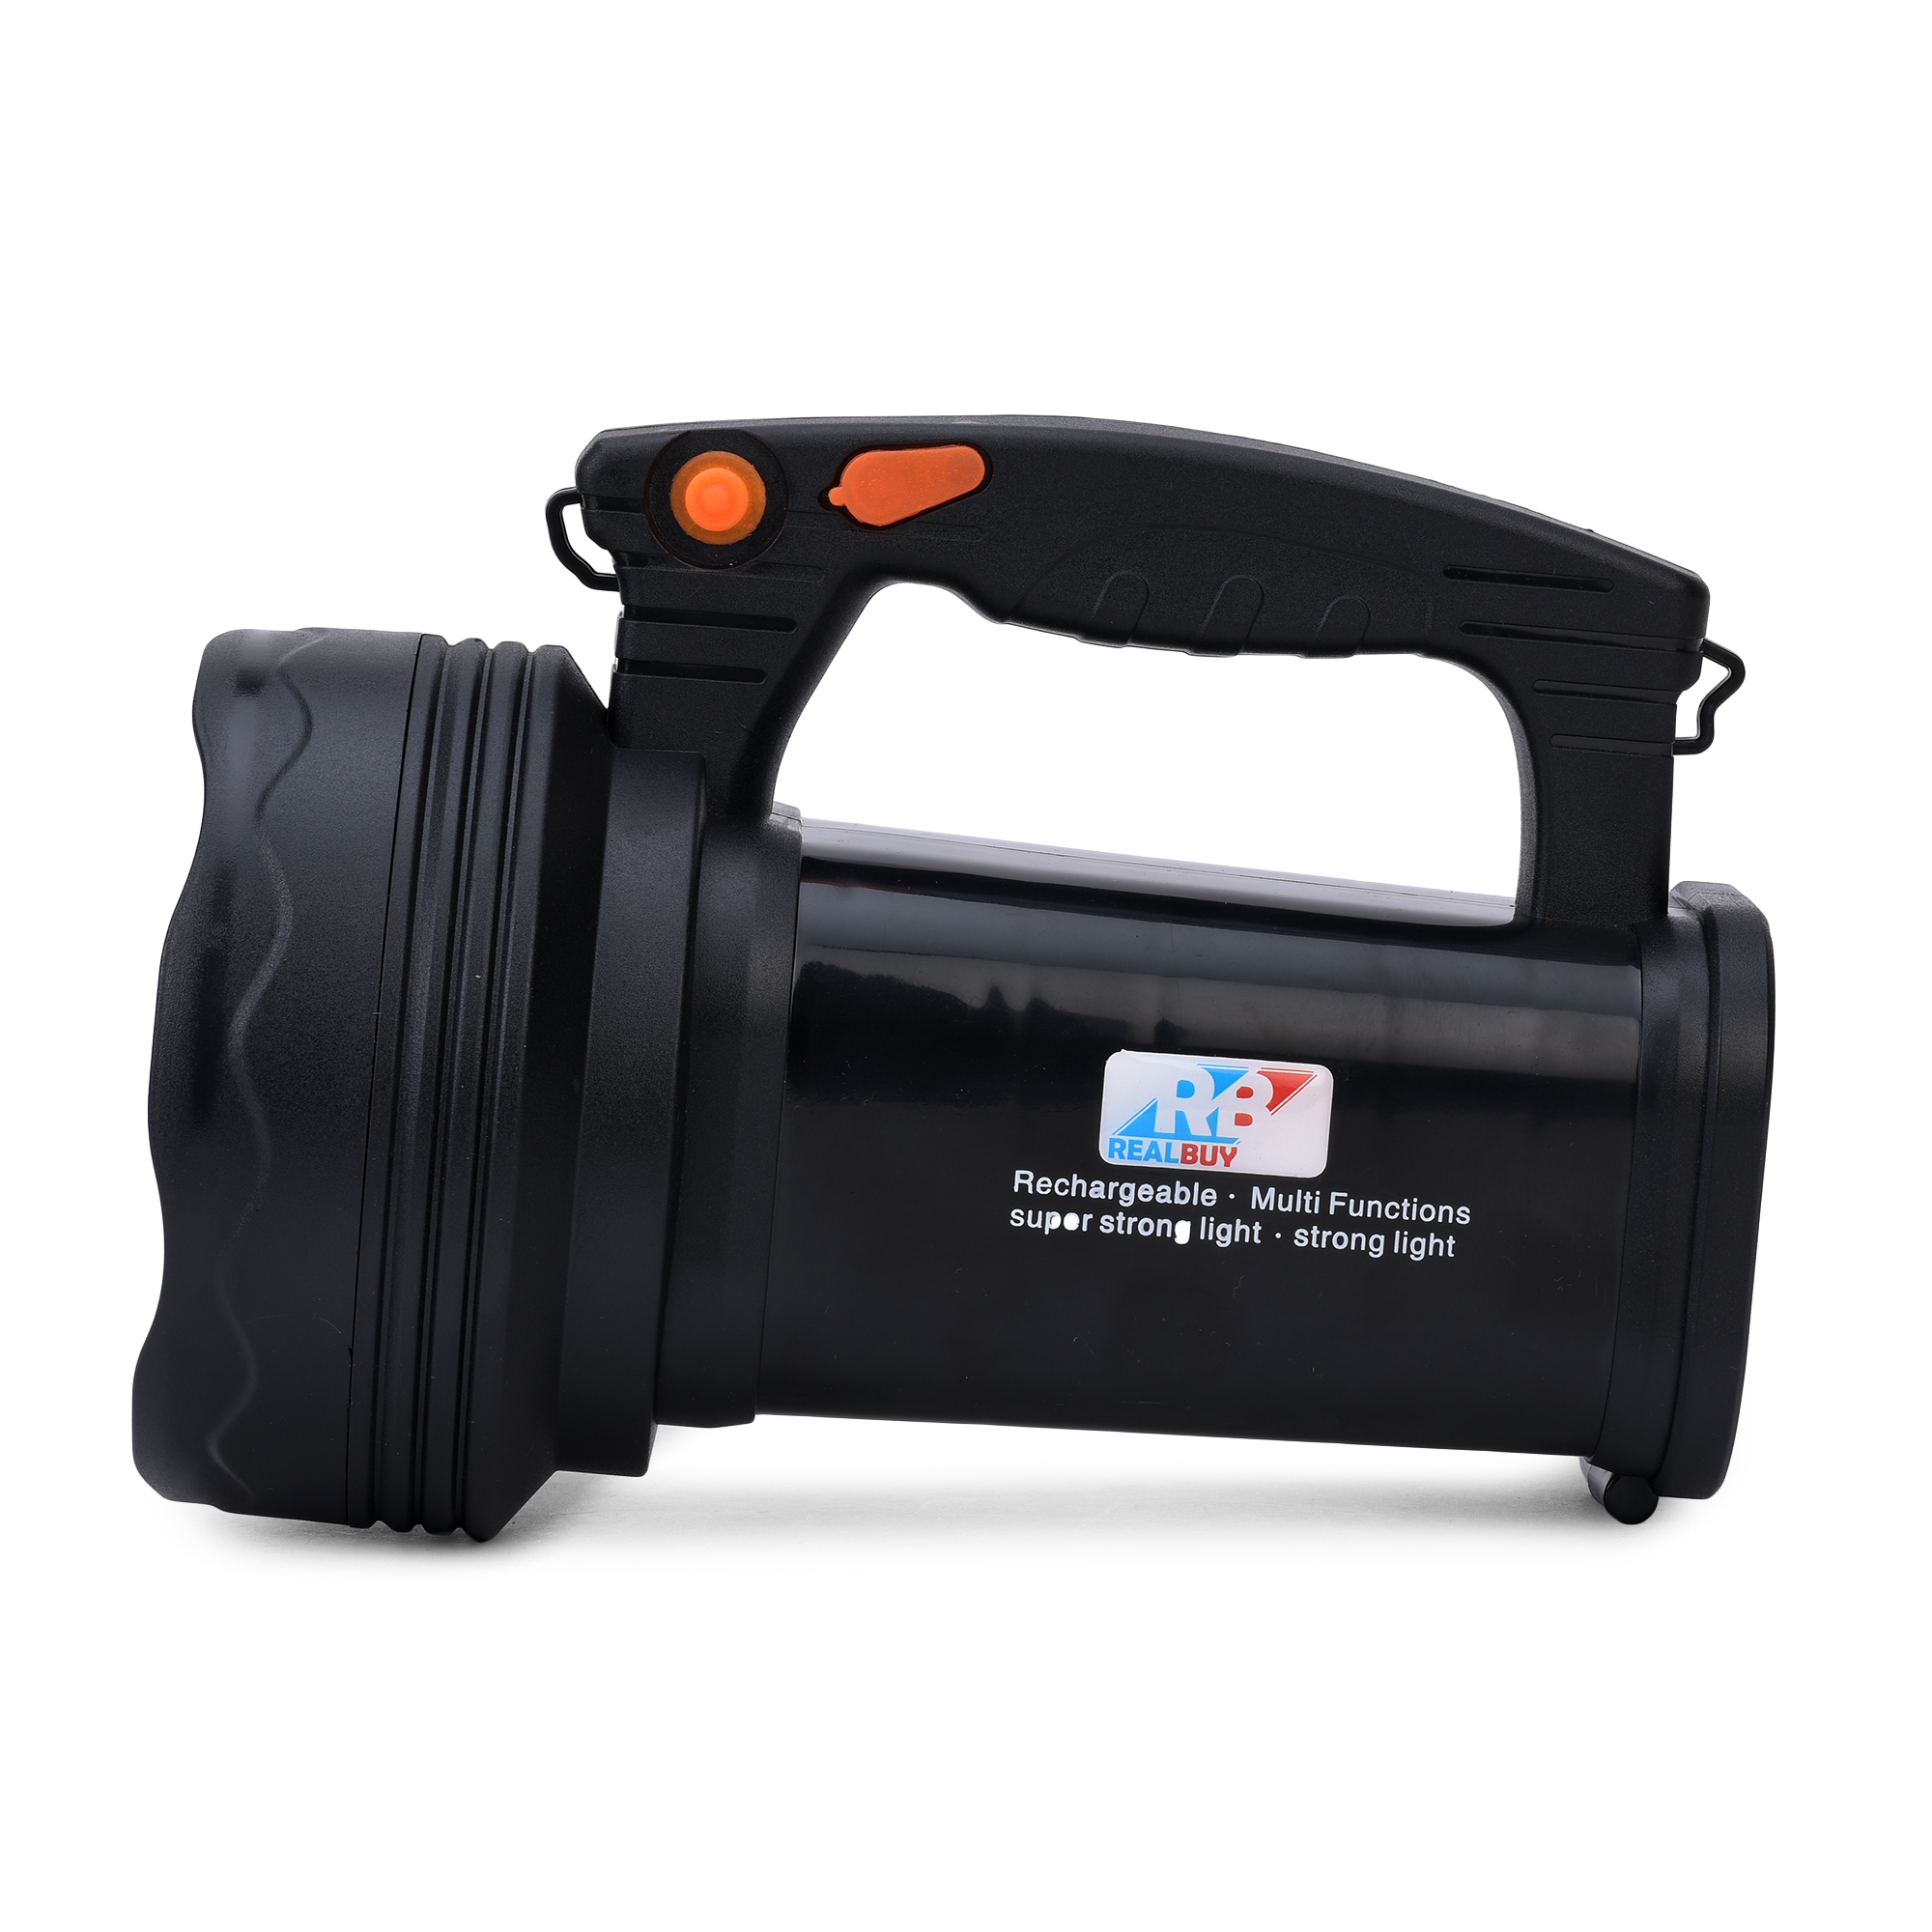 LED Search Light 15W with Lithium Battery (Range up to 800 Meters) - Rechargeable